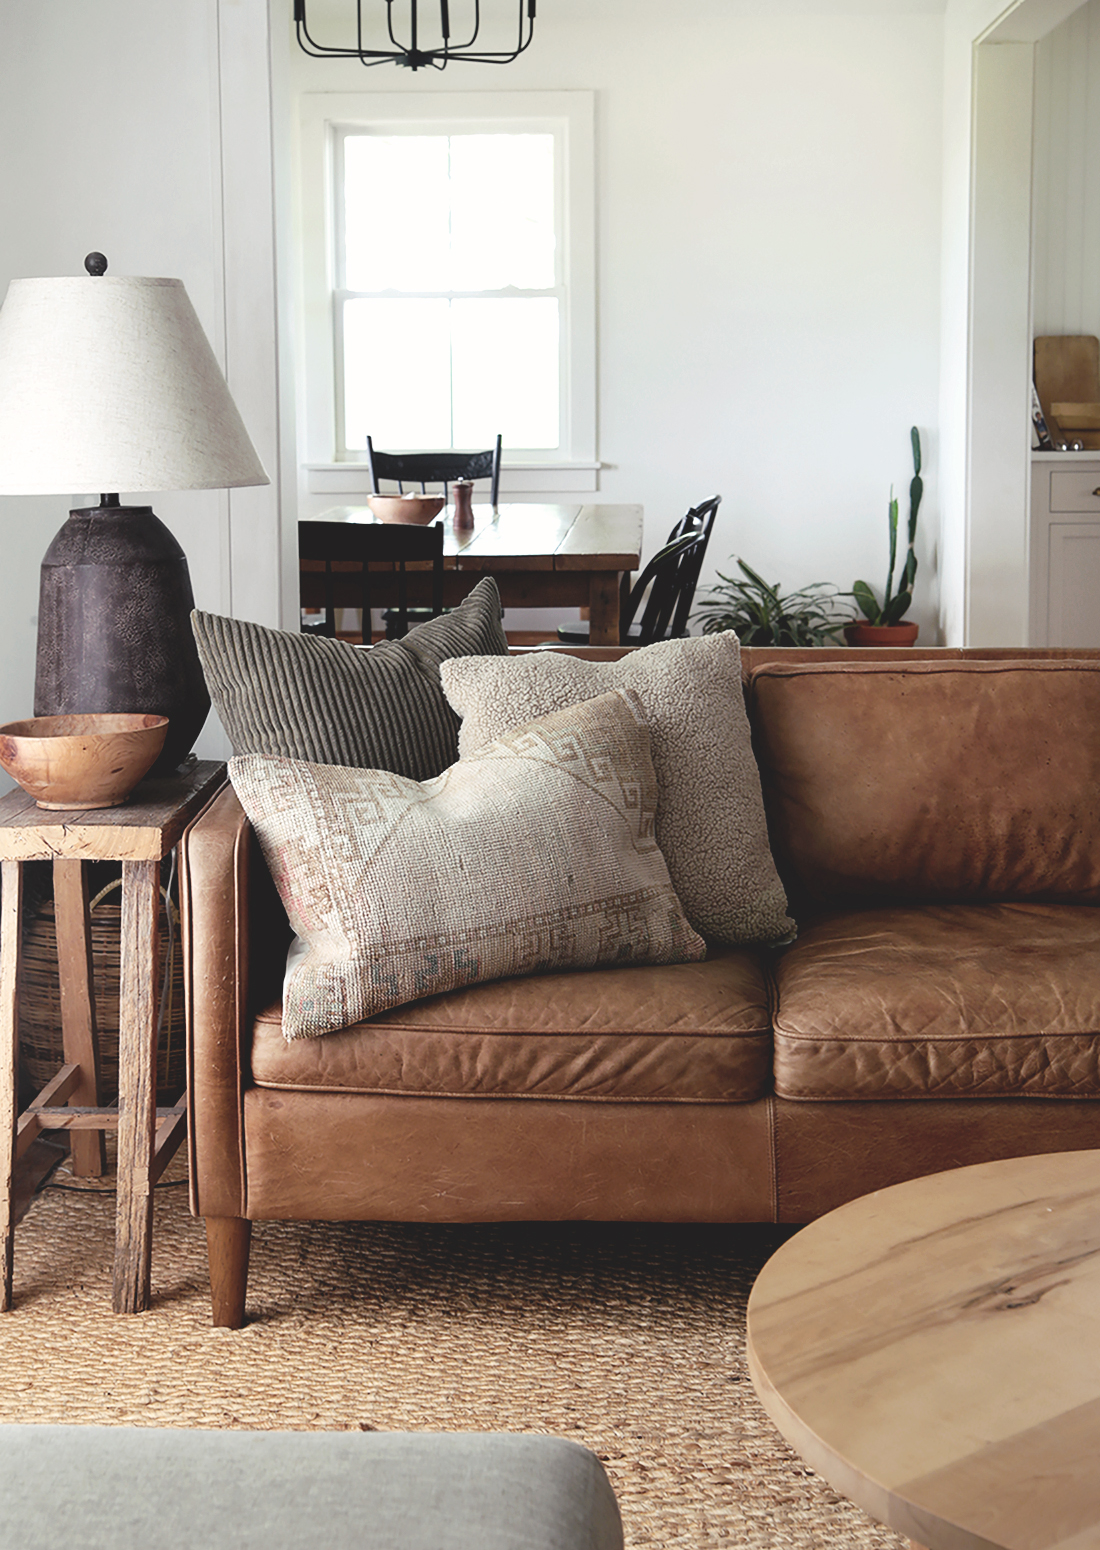 The Timeless Elegance of a Leather Sofa:
Why This Classic Piece Will Never Go Out of Style